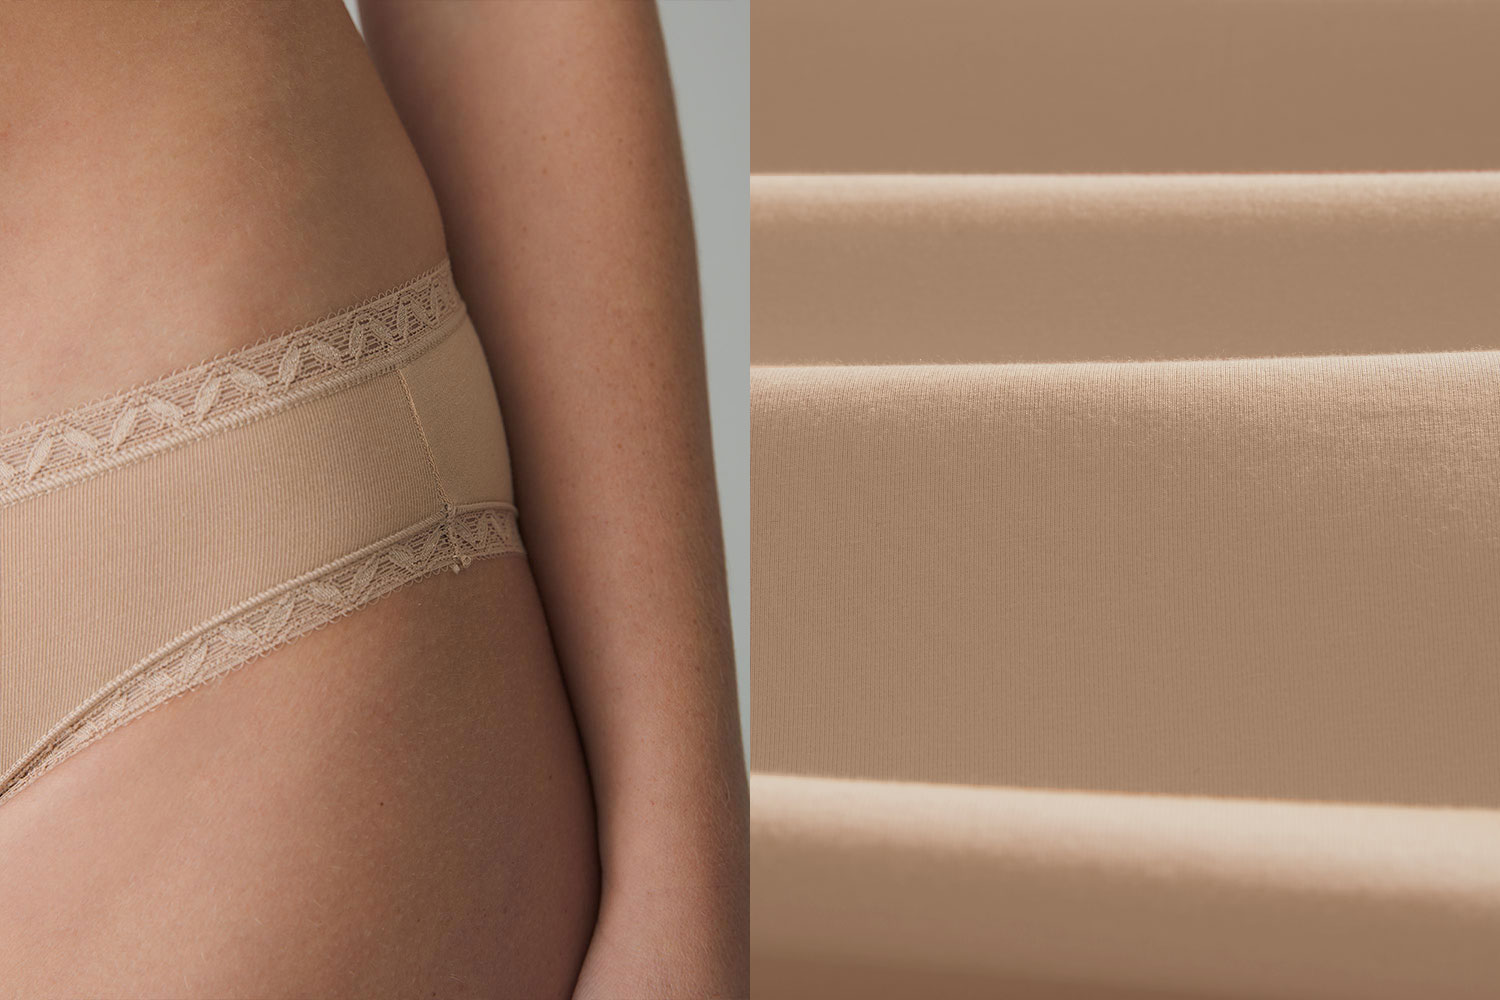 Close-up image of a Soma women's model wearing beige modal underwear next to a close-up image of the modal fabric.